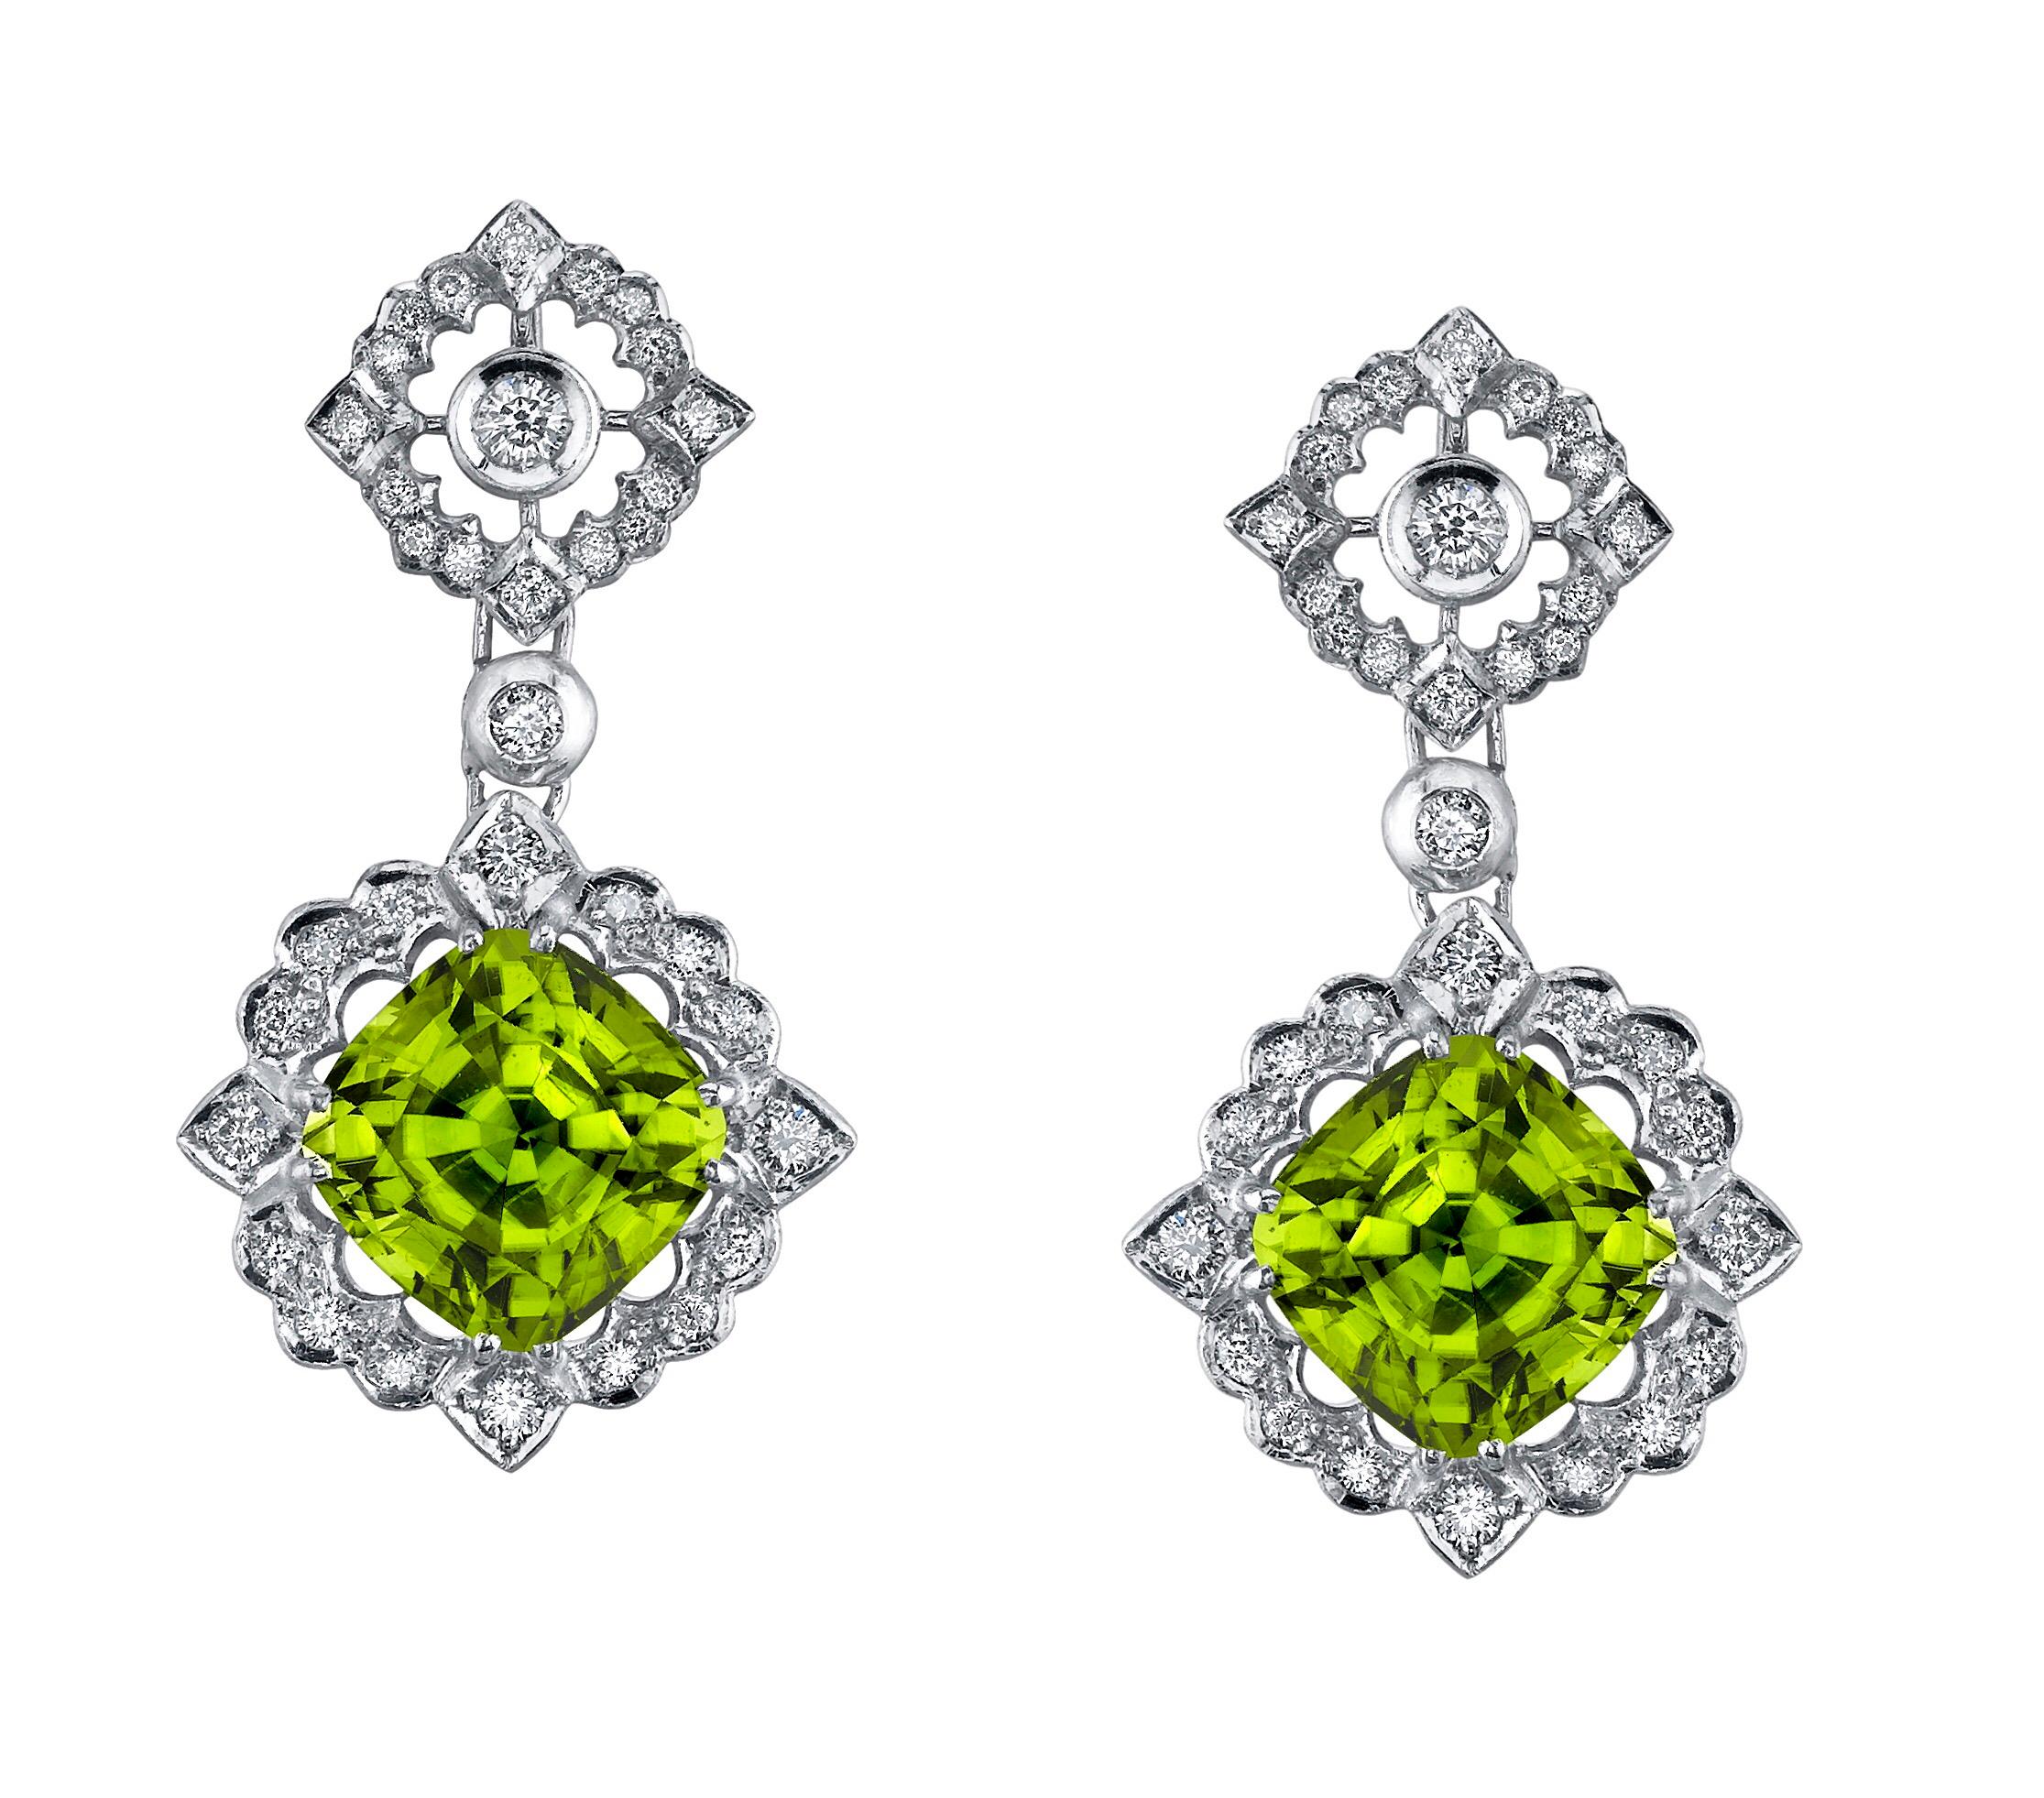 Peridot earrings for women, unveiling a pair of remarkable 12.89 carat total cushion cut Peridots, and a total of 1.00 carat diamonds, set in 18K white gold.
Total length: 1.5 inches.
Returns are accepted and paid by us within 7 days of